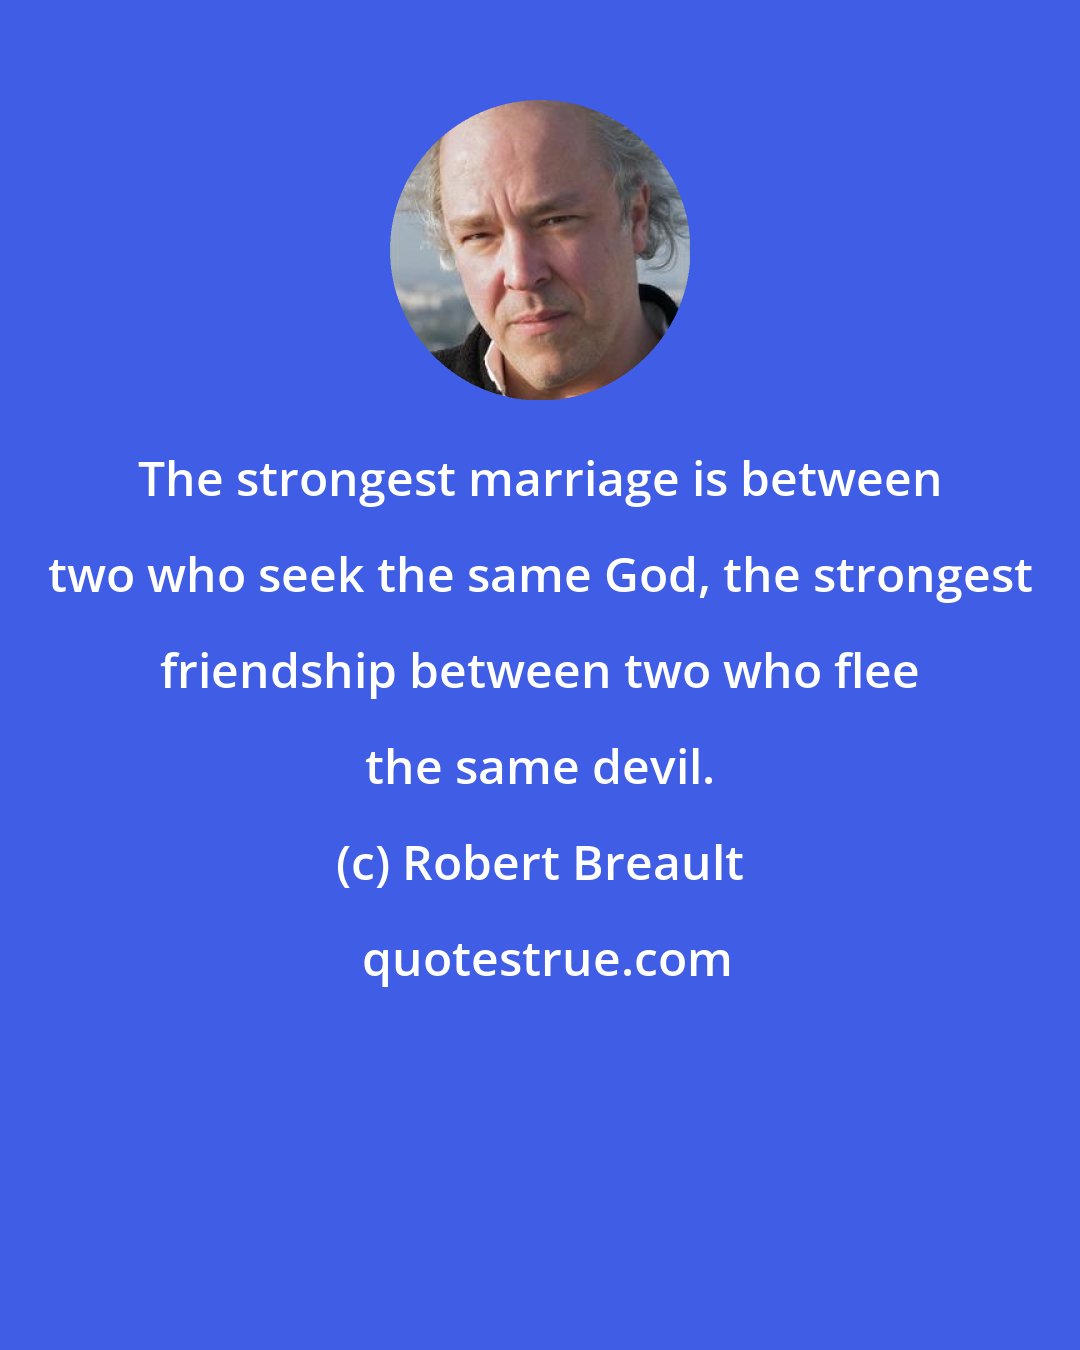 Robert Breault: The strongest marriage is between two who seek the same God, the strongest friendship between two who flee the same devil.